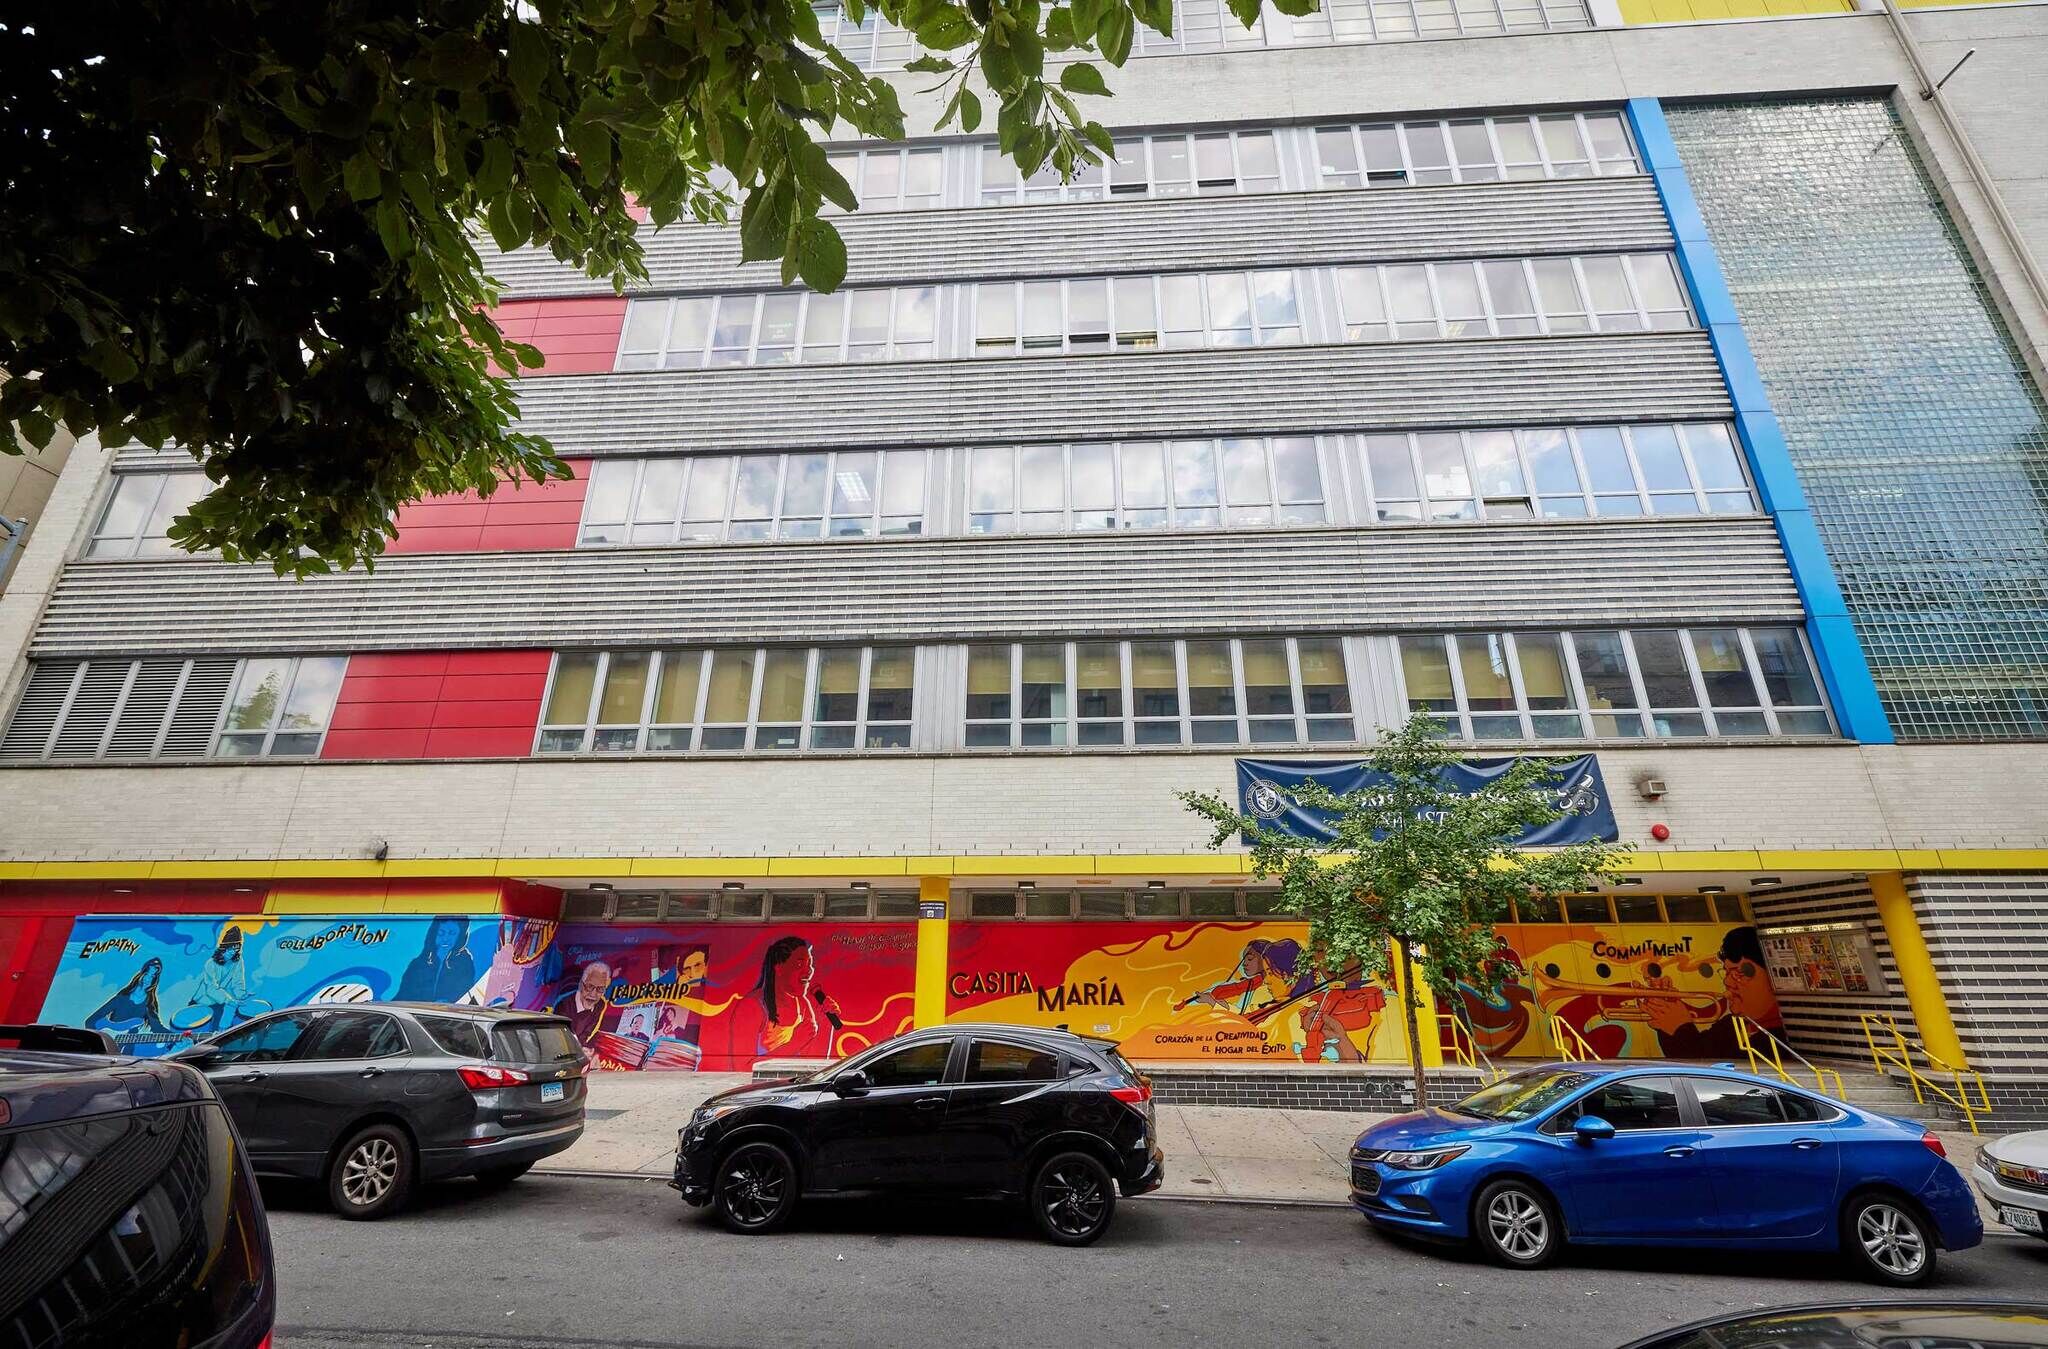 A building with colorful bright murals on the side, cars parked in the road in front of it.